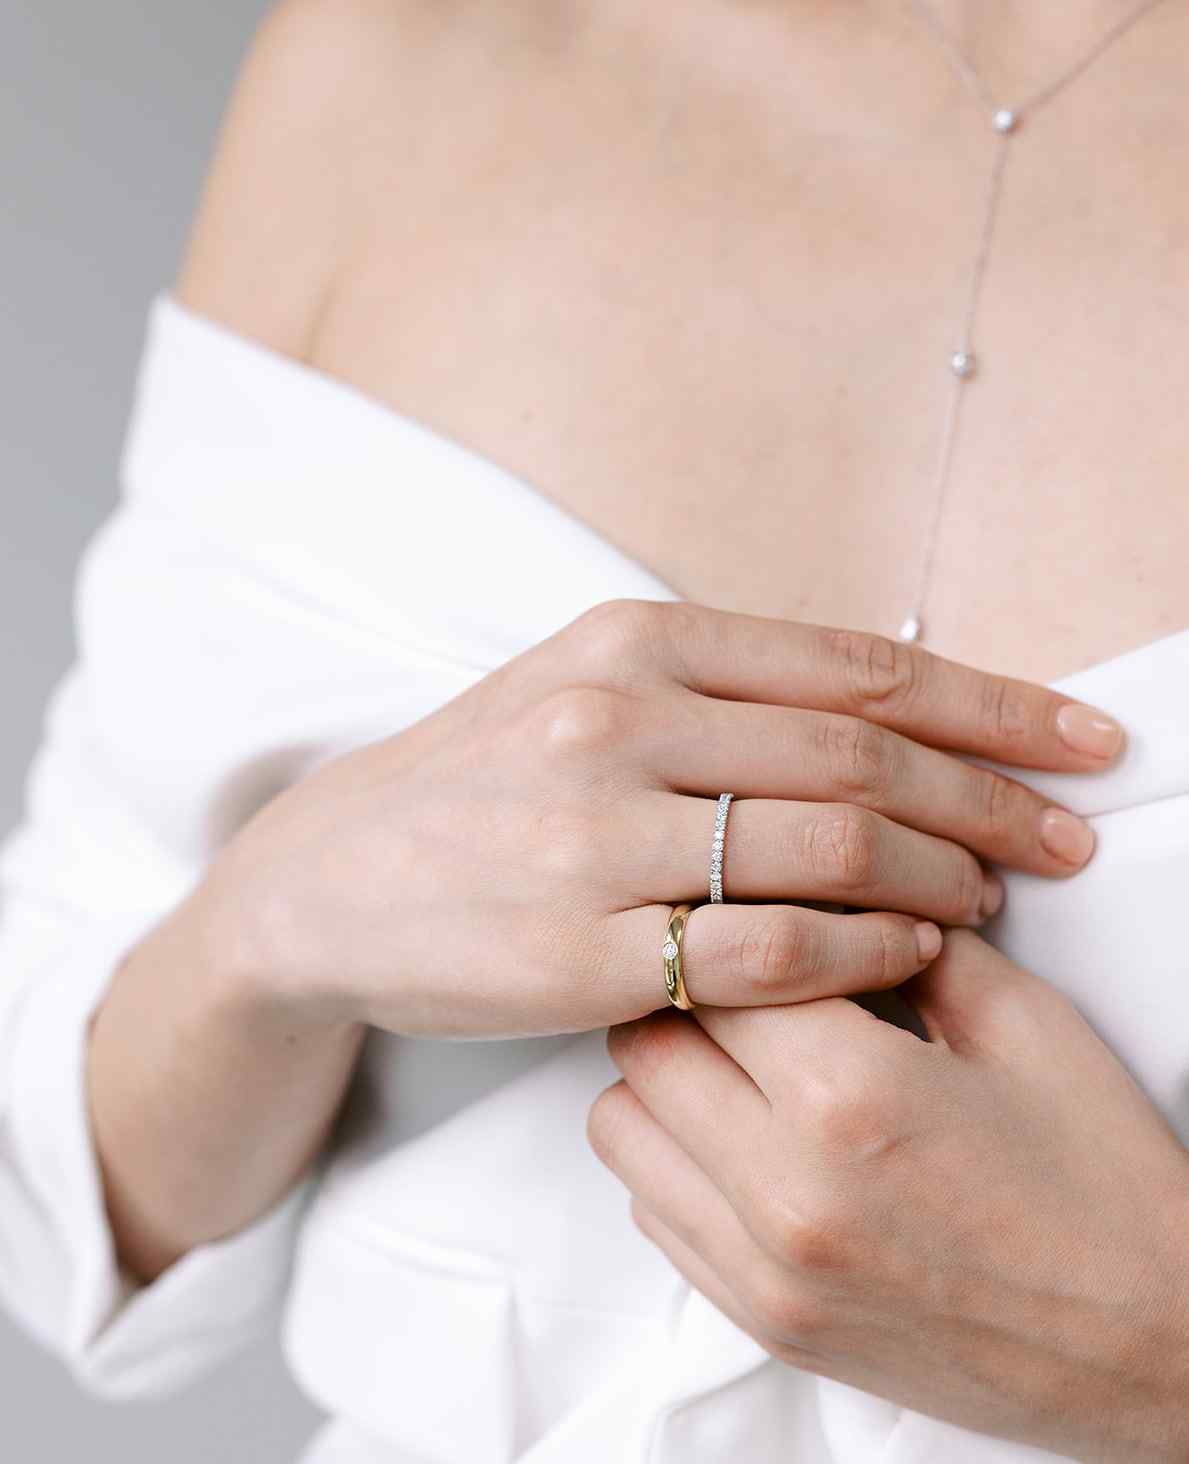 A model wears the Éternité ring and the Talia Pinky ring - both of which can be used as a wedding band. Made with lab-grown diamonds and recycled 18K gold.